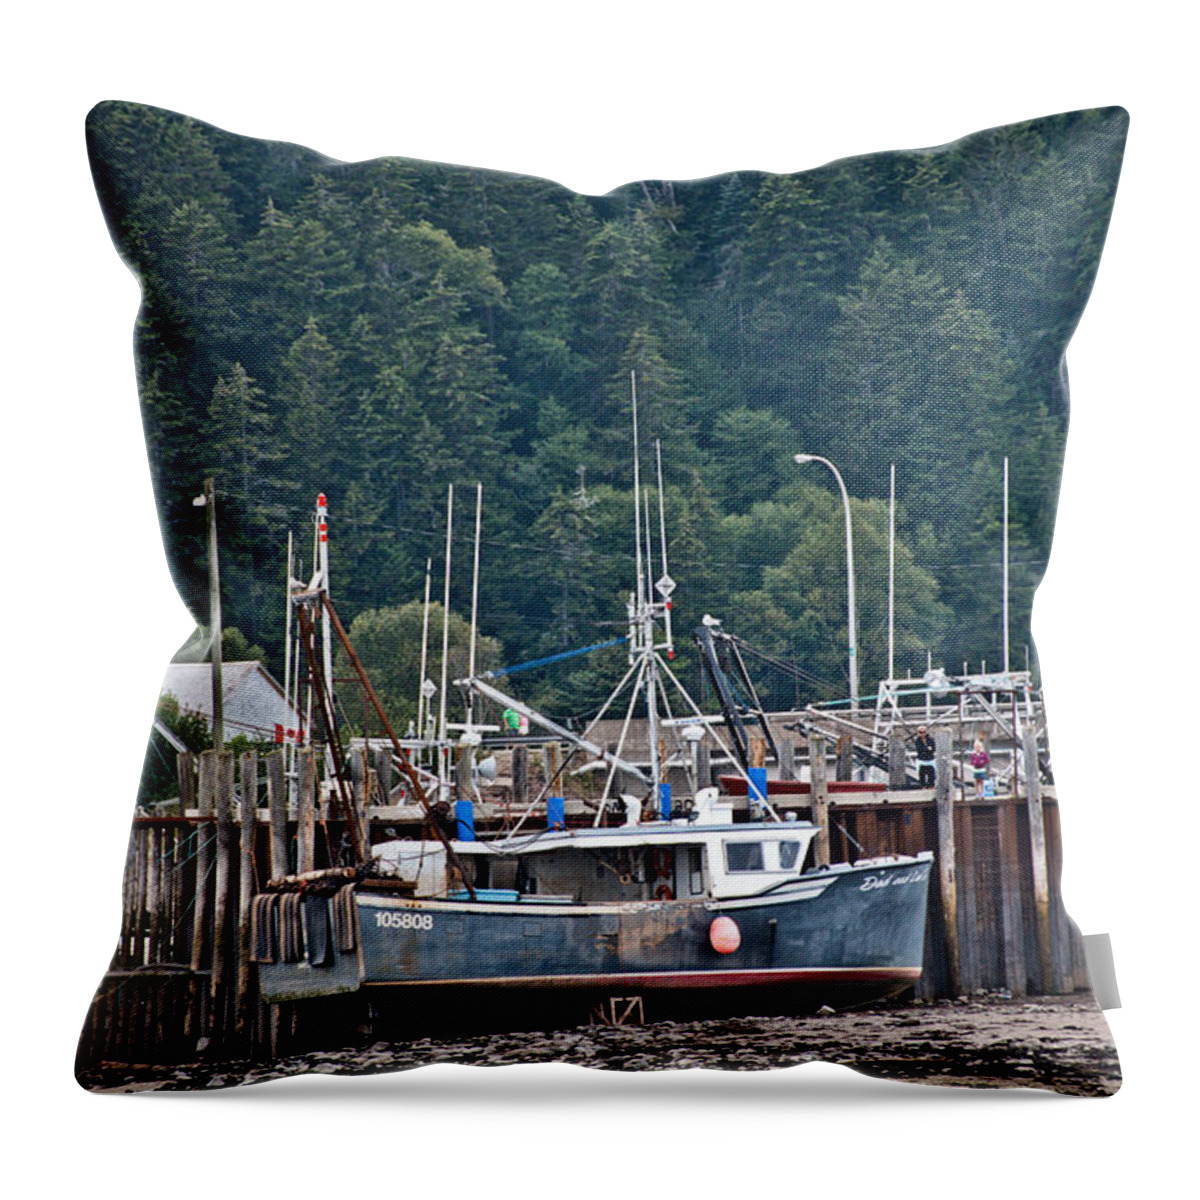  Throw Pillow featuring the photograph Low Tide Fishing Boat by Cheryl Baxter